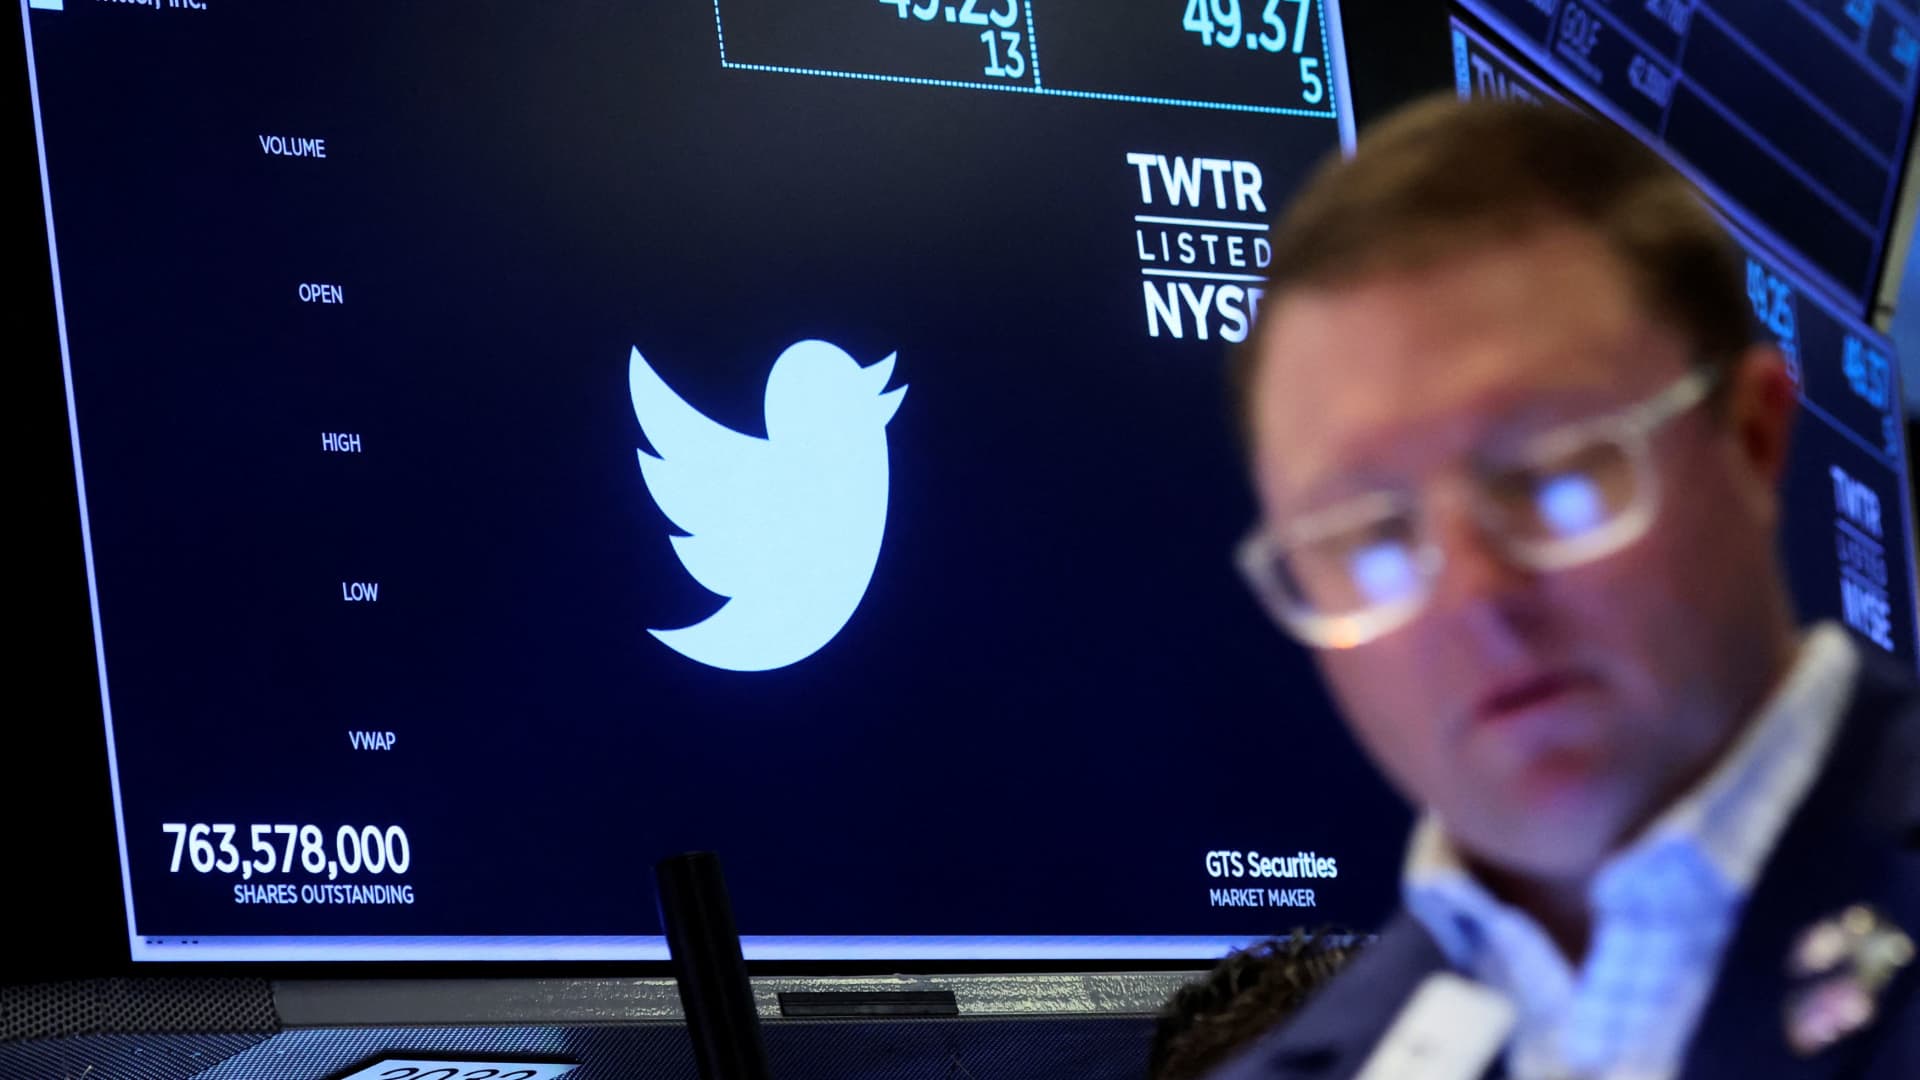 Twitter shares fall to about $46, dropping its market cap to $9B below Elon Musk's purchase price of $54.20, amid investor concerns about the deal